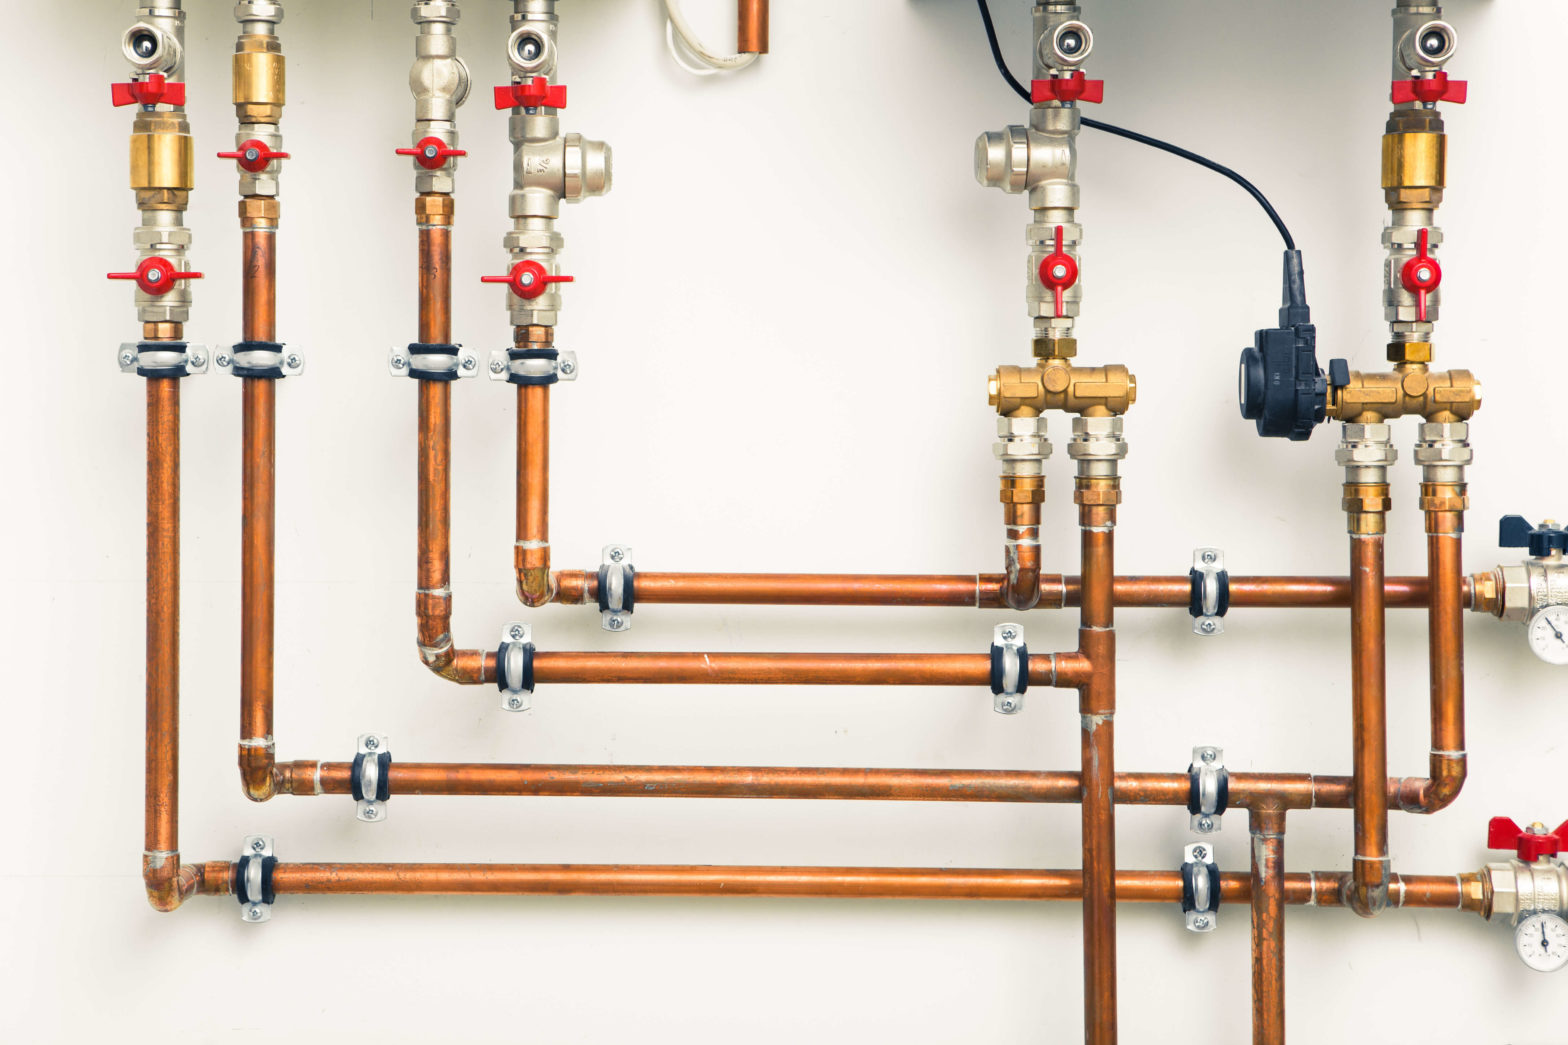 Learn how to tell if your pipes are frozen, prevention and what to do if they are.